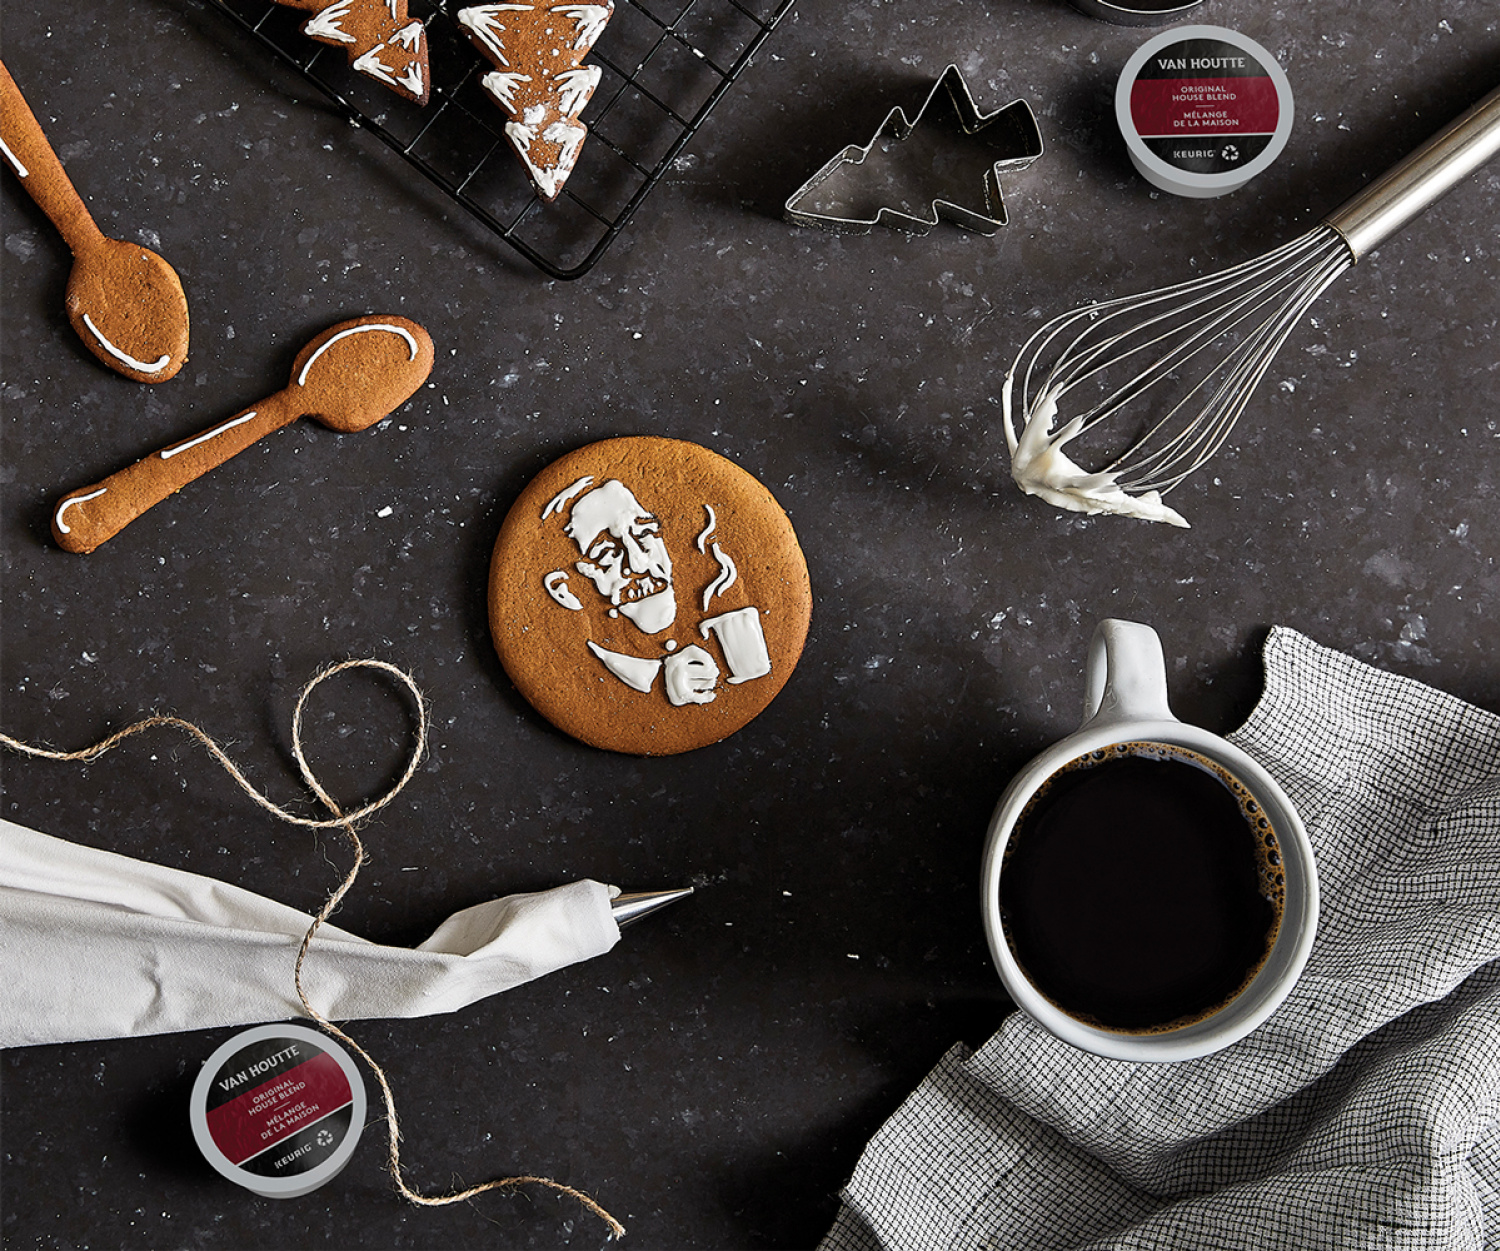 Van Houtte Coffee | Holiday cookies and cup of coffee